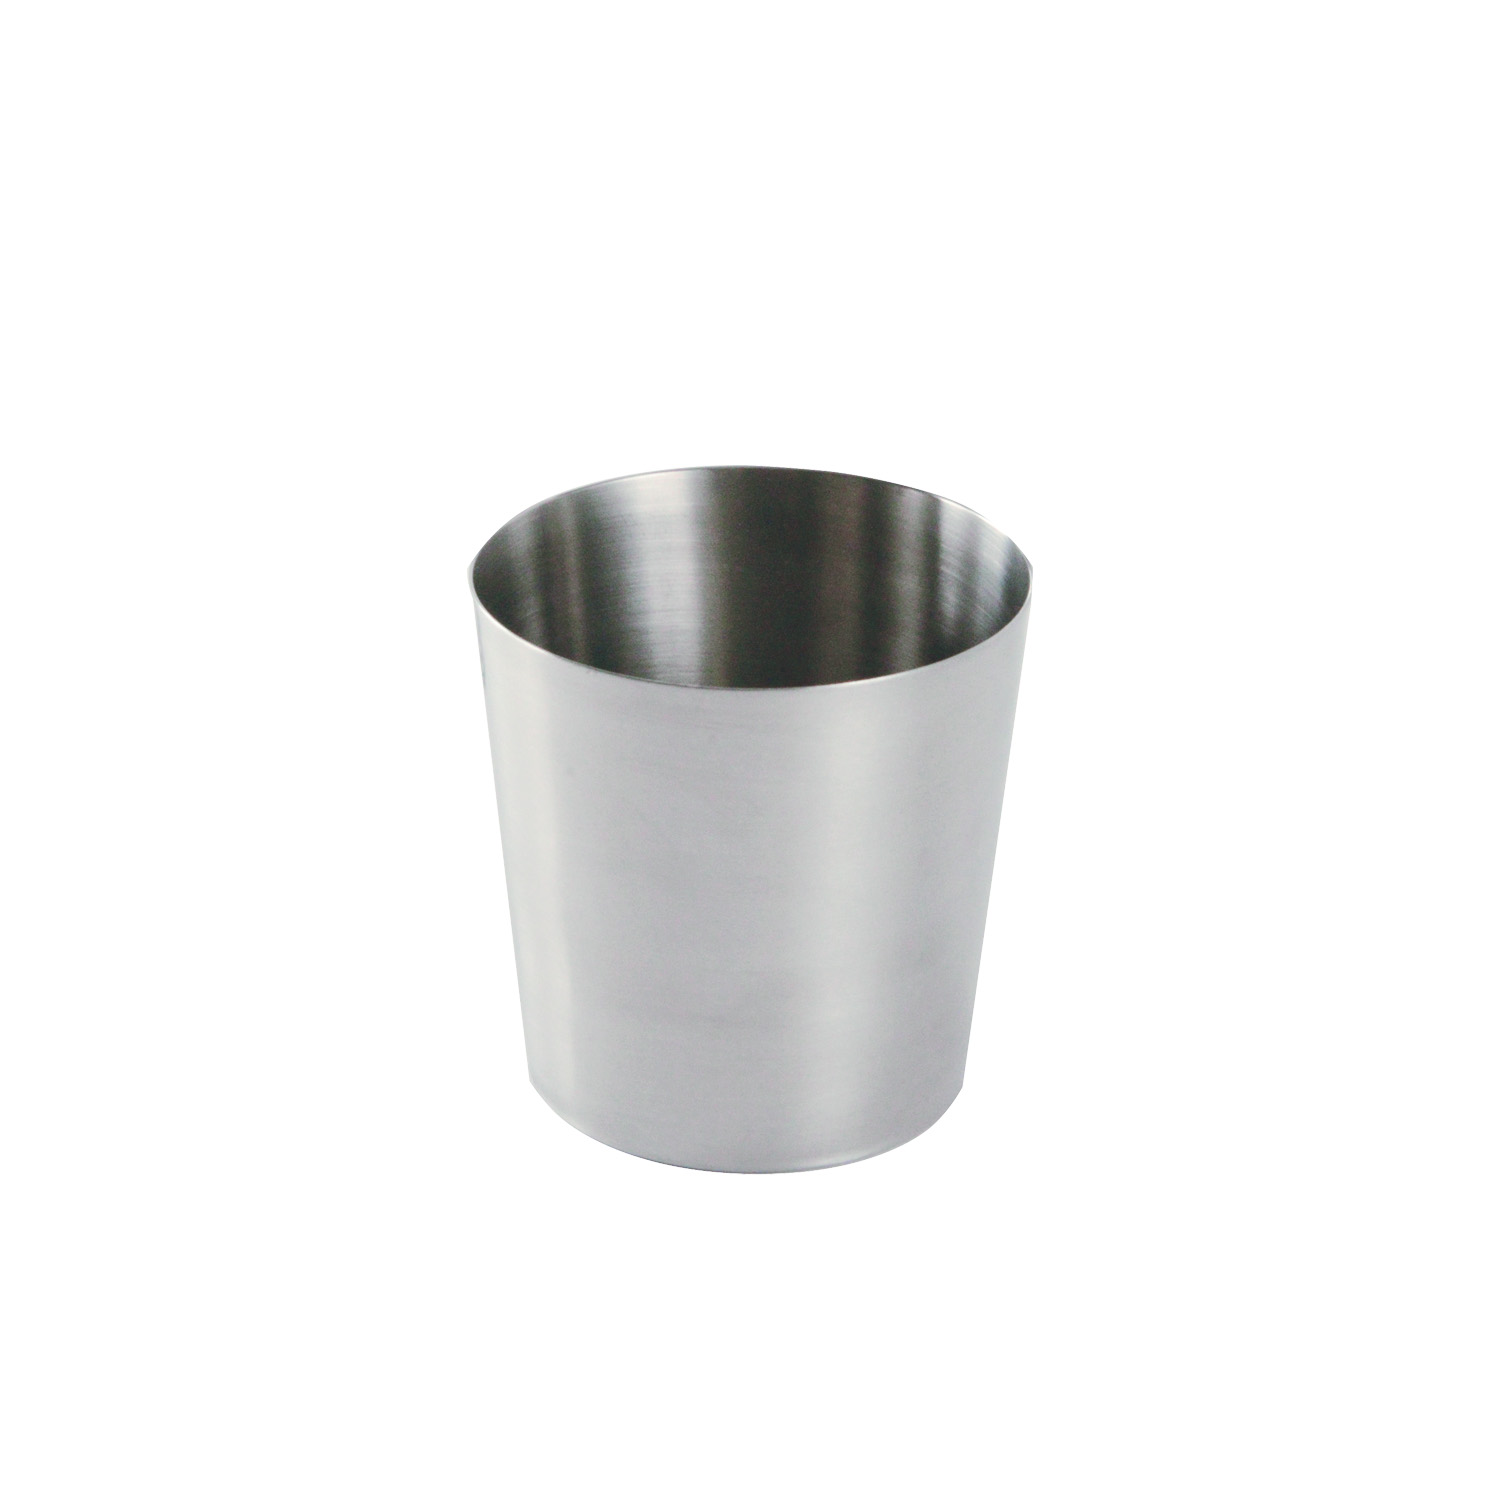 CAC China SMFC-3S Smooth Stainless Steel Mini Fry Cup 3 1/2" Dia x 3-1/2" H